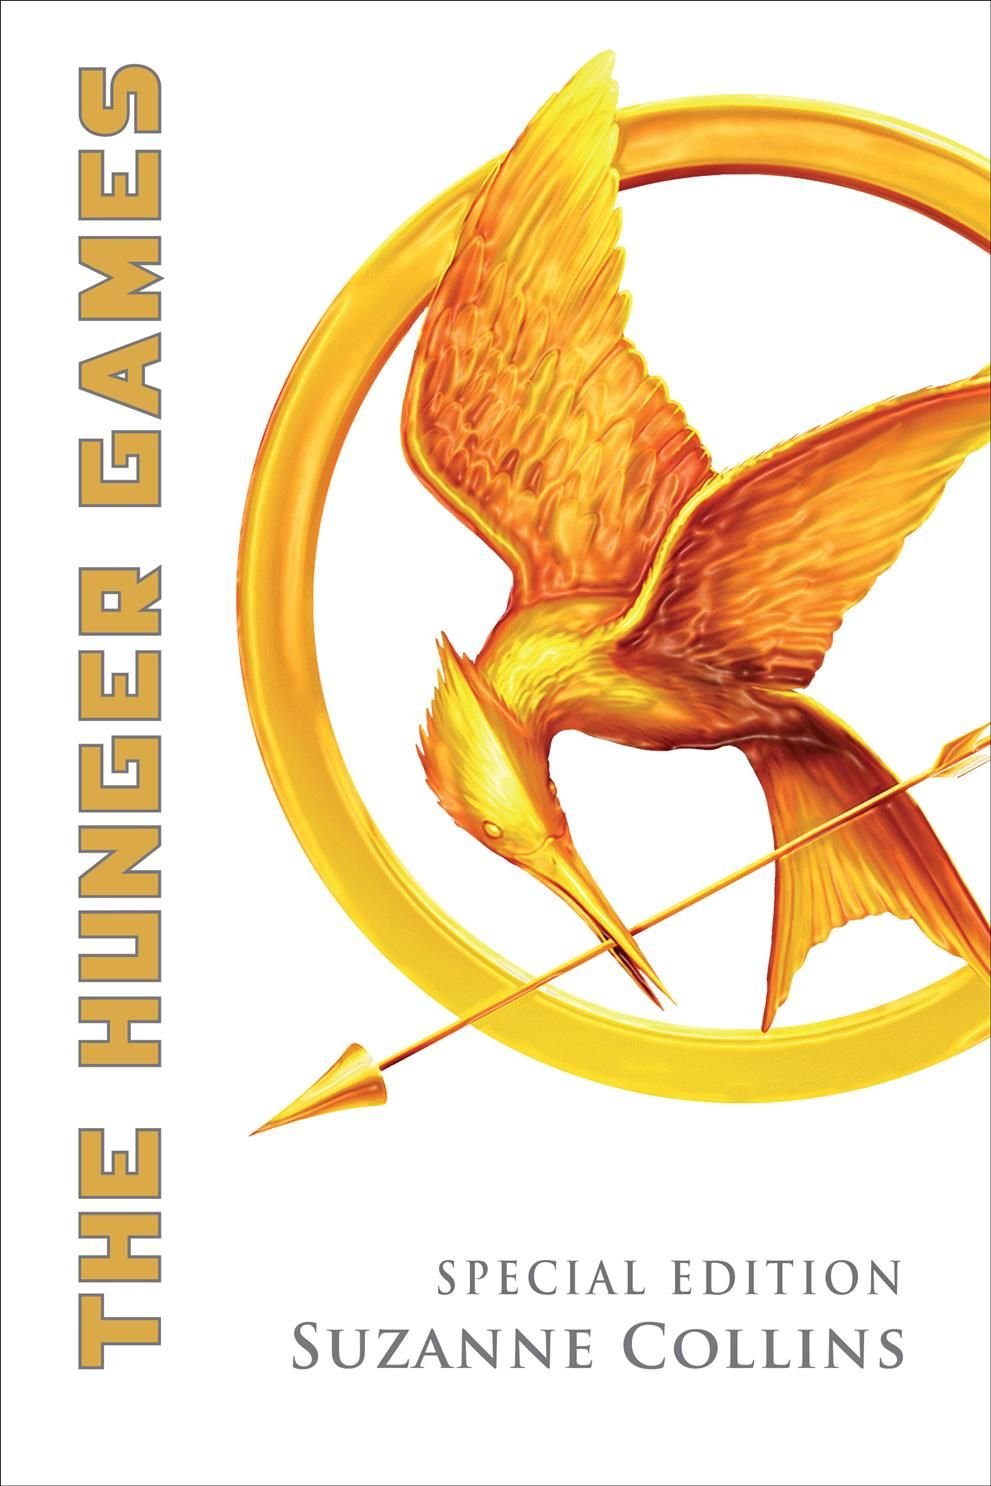 The hunger games 2 : Catching fire - scholastic - 9781407132099